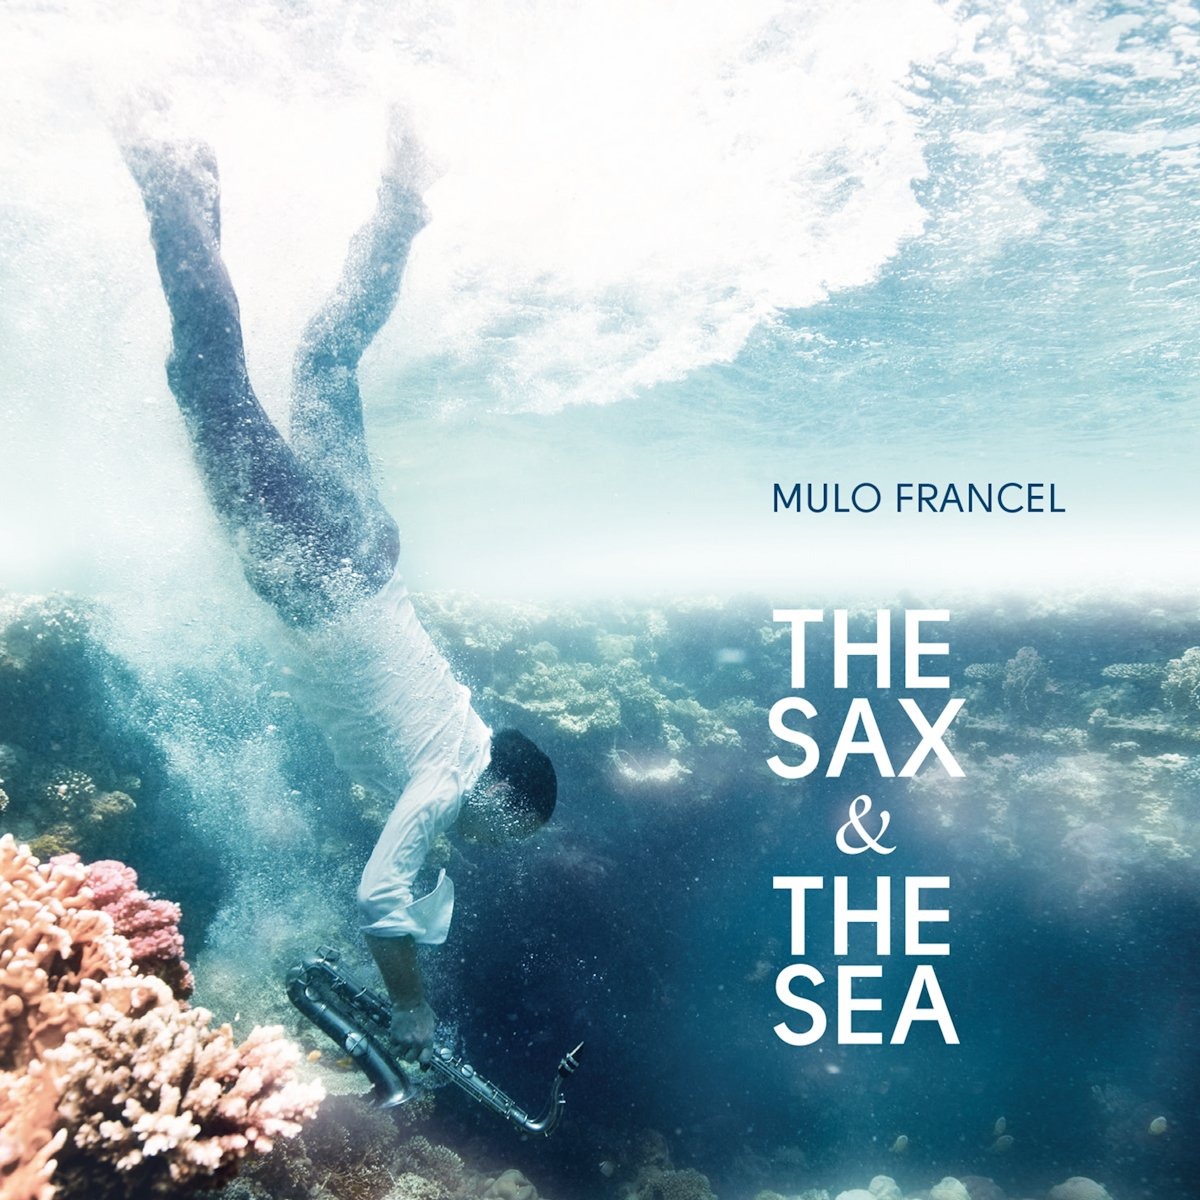 mulo francel lp cover by Mike Meyer Photography